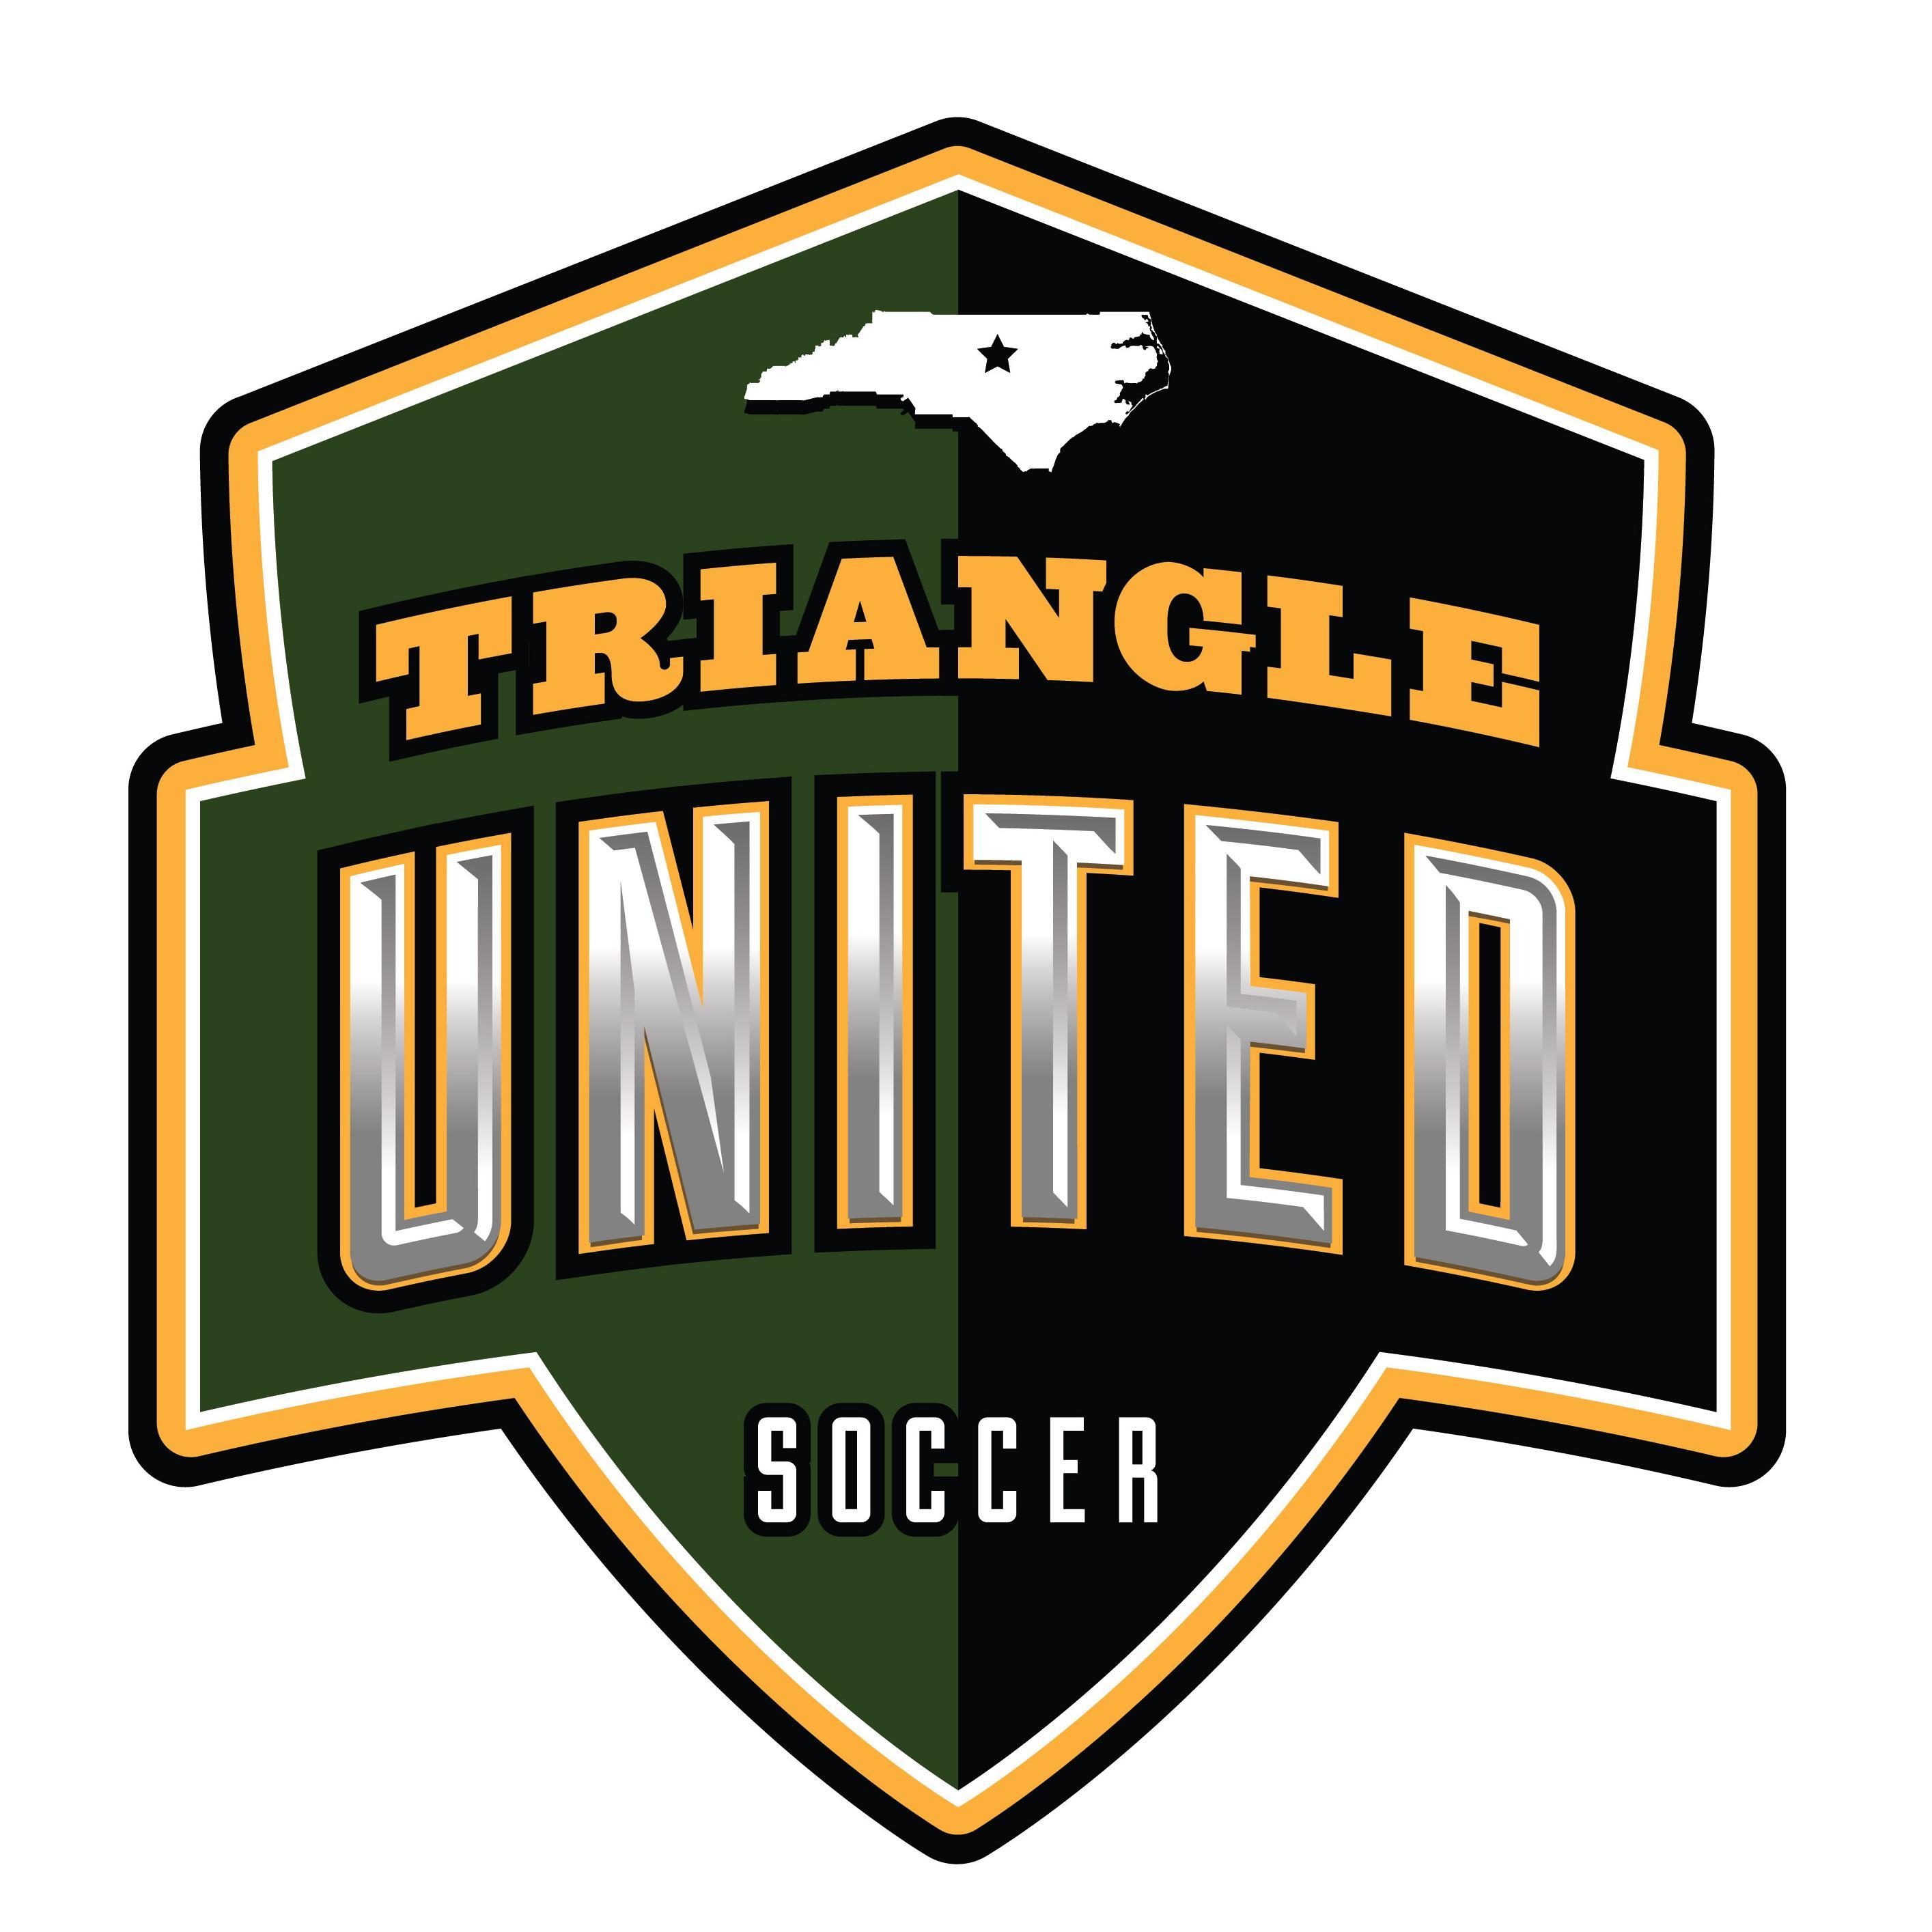 The official Twitter account for Triangle United Soccer Association!